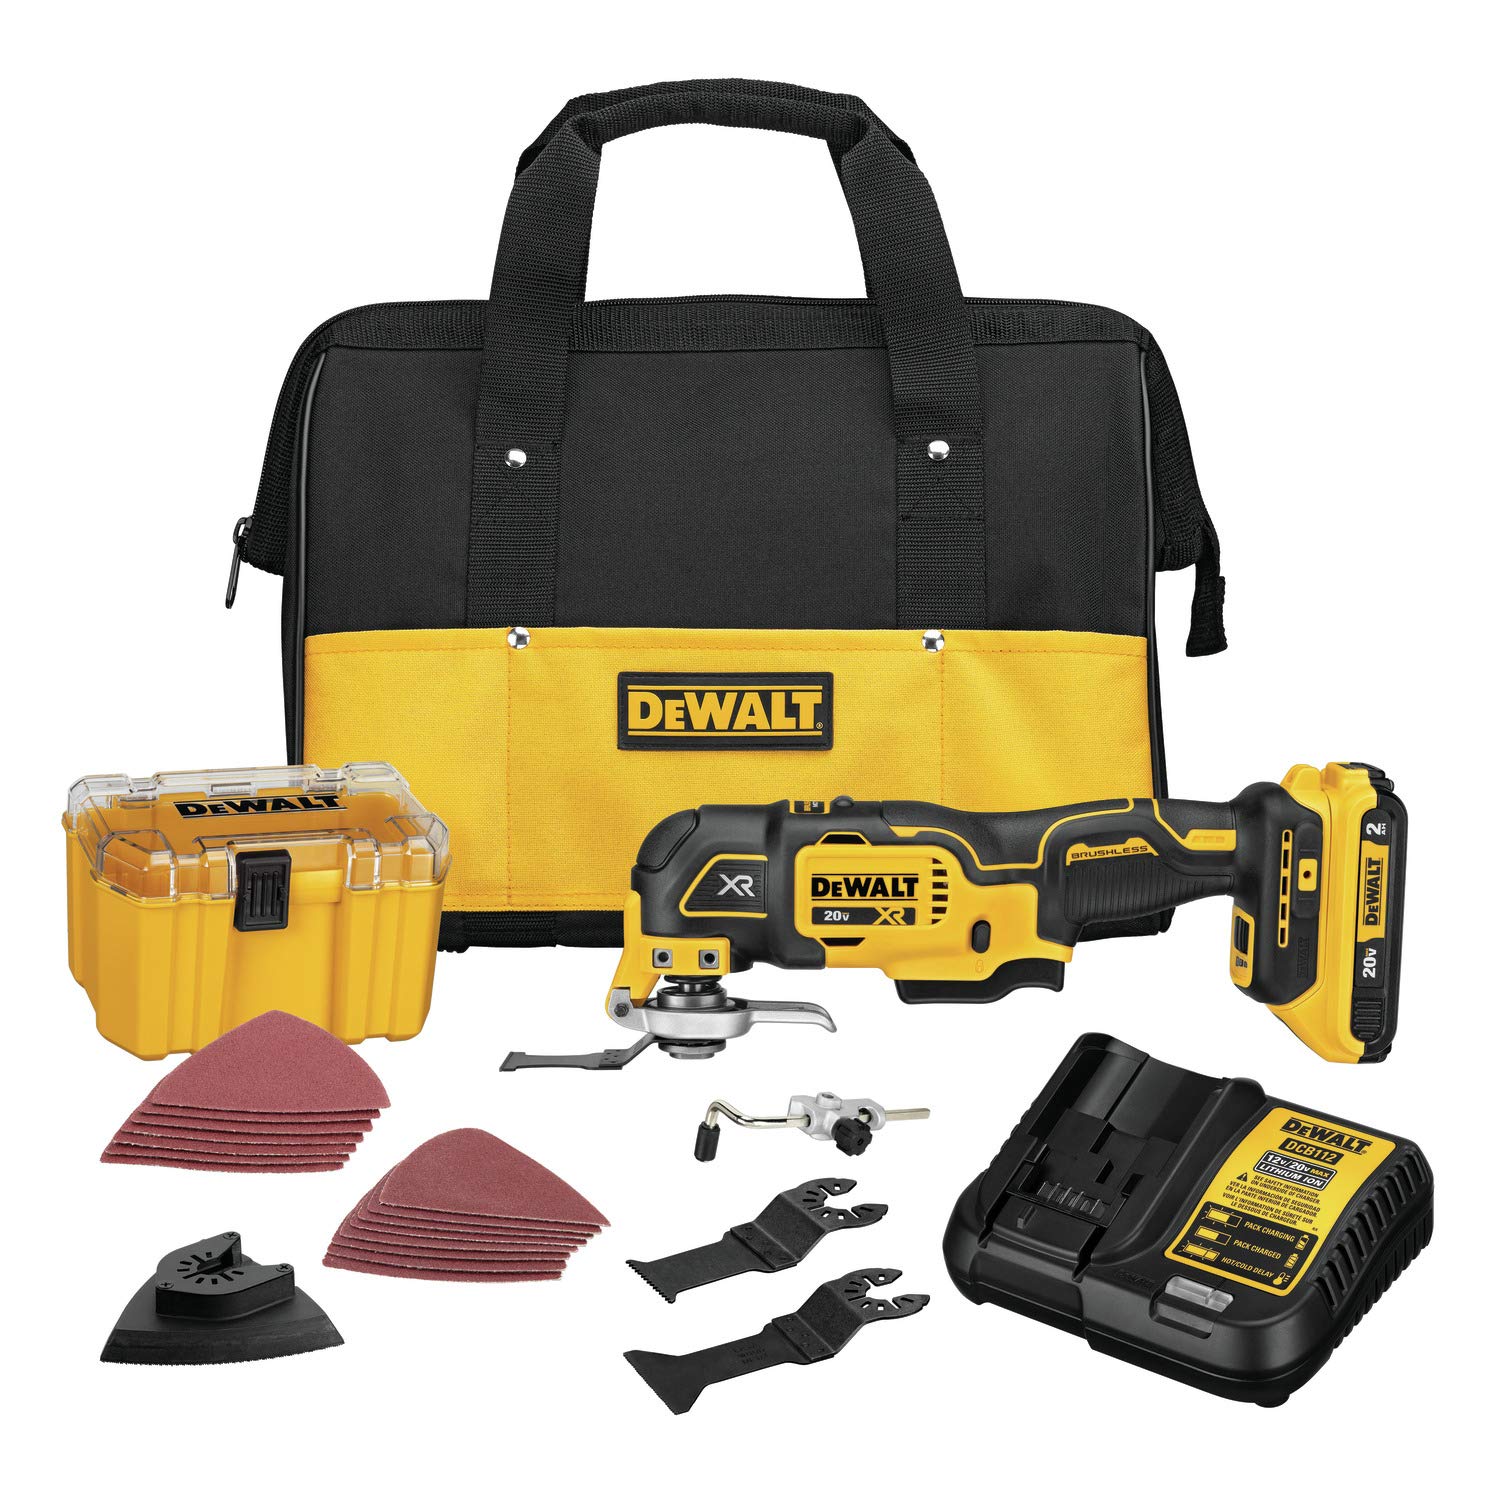 DEWALT 20V MAX XR Oscillating Multi-Tool Kit with Grout Removal Blade (DCS356D1)